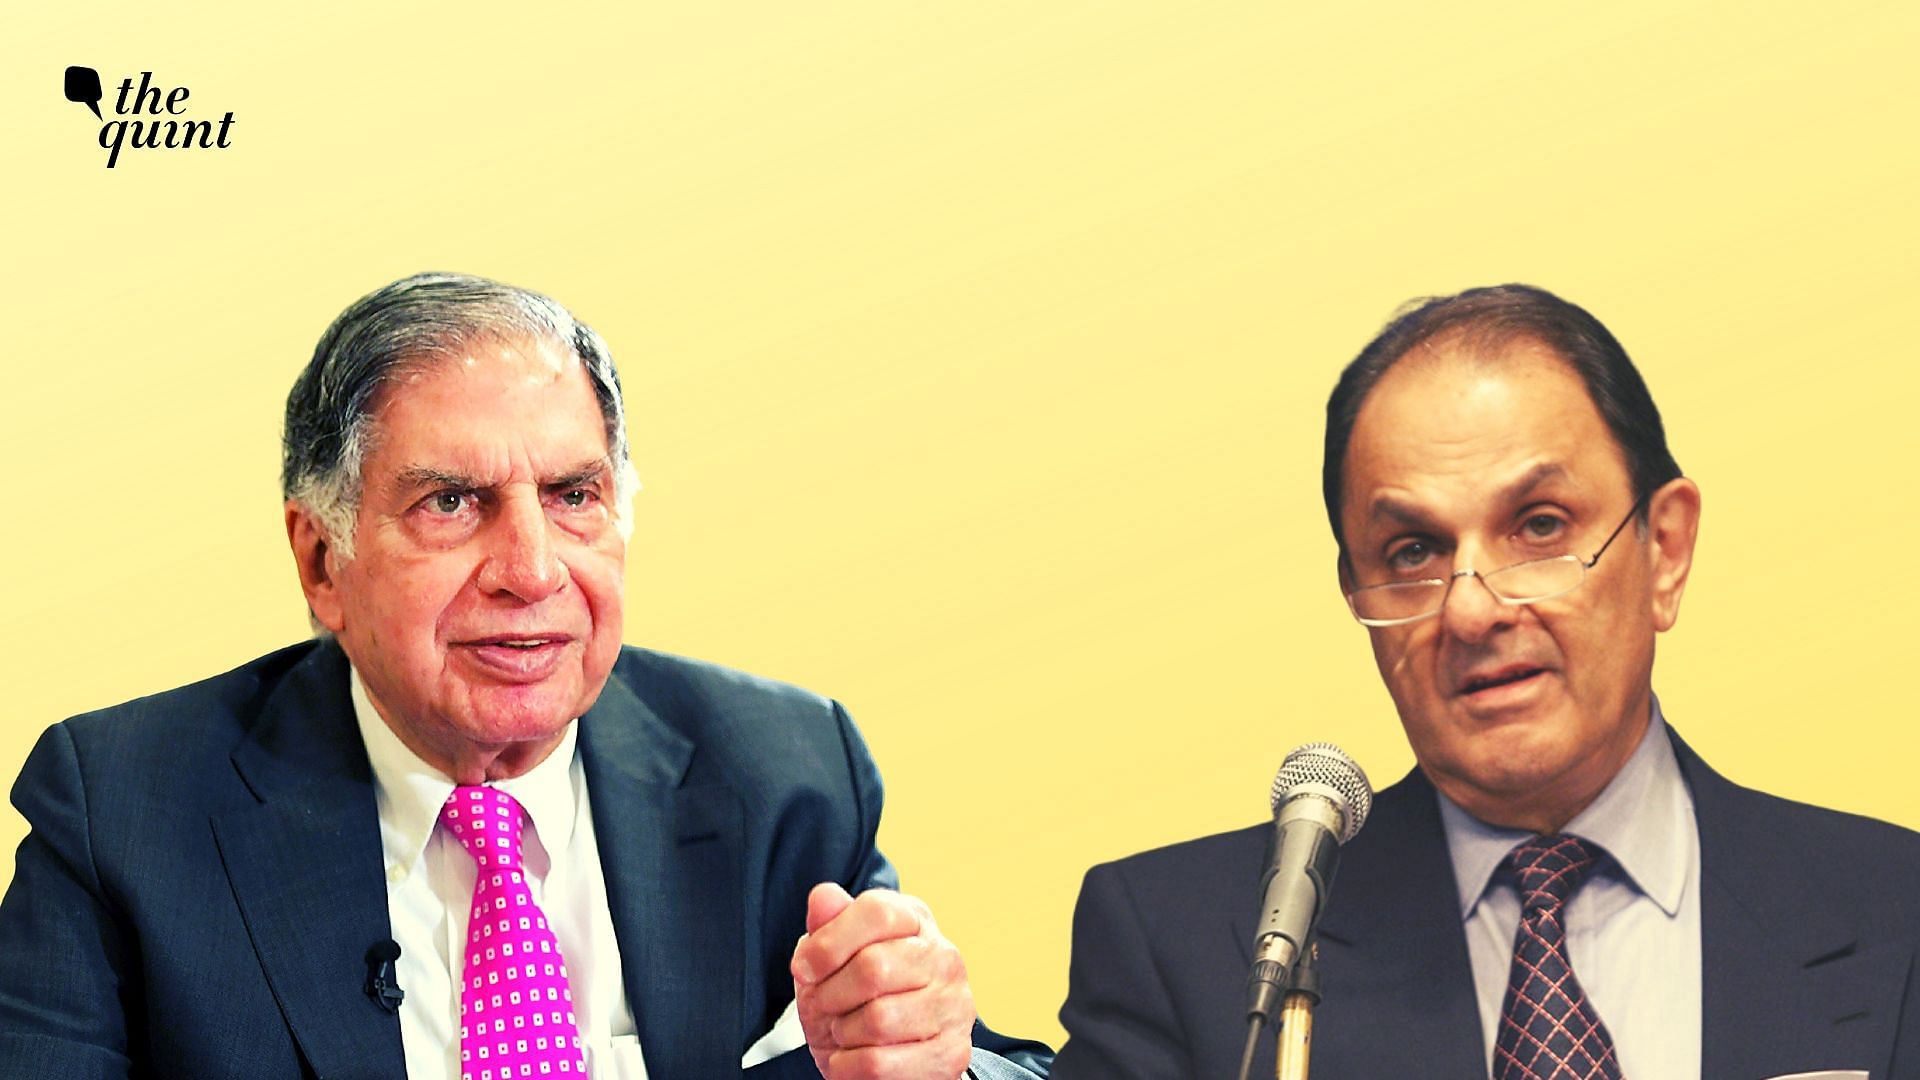 The Supreme Court asked Bombay Dyeing chairman Nusli Wadia and Ratan Tata, chairman emeritus of Tata Sons, to sit together and resolve their differences in a defamation case.